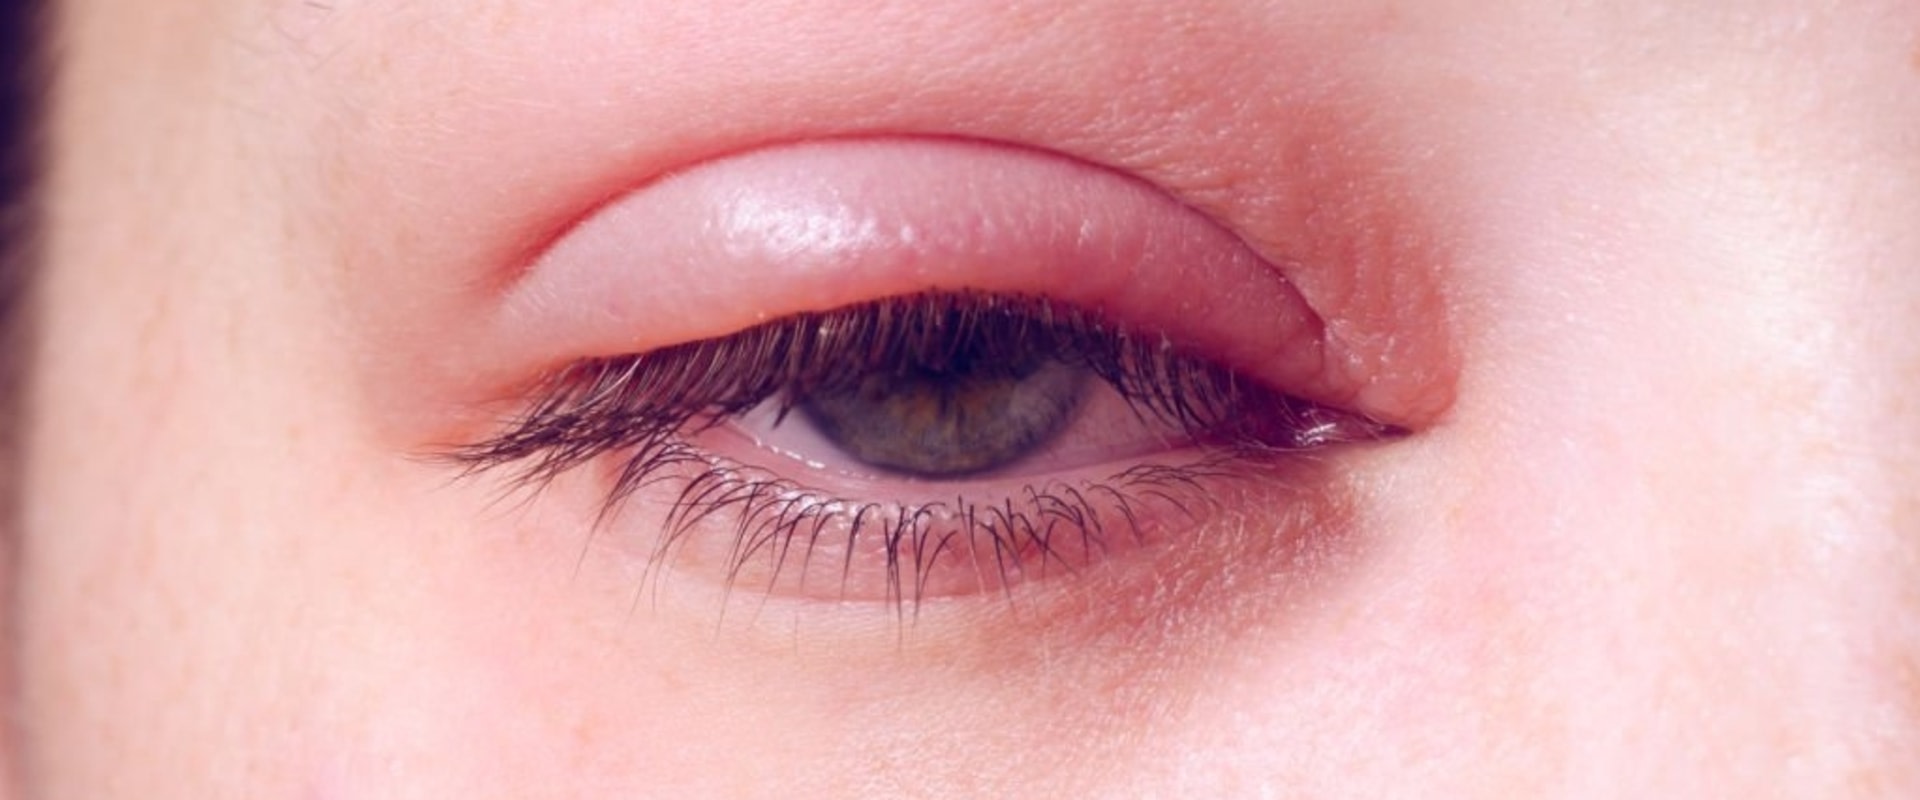 How do you treat infected eyelash extensions?